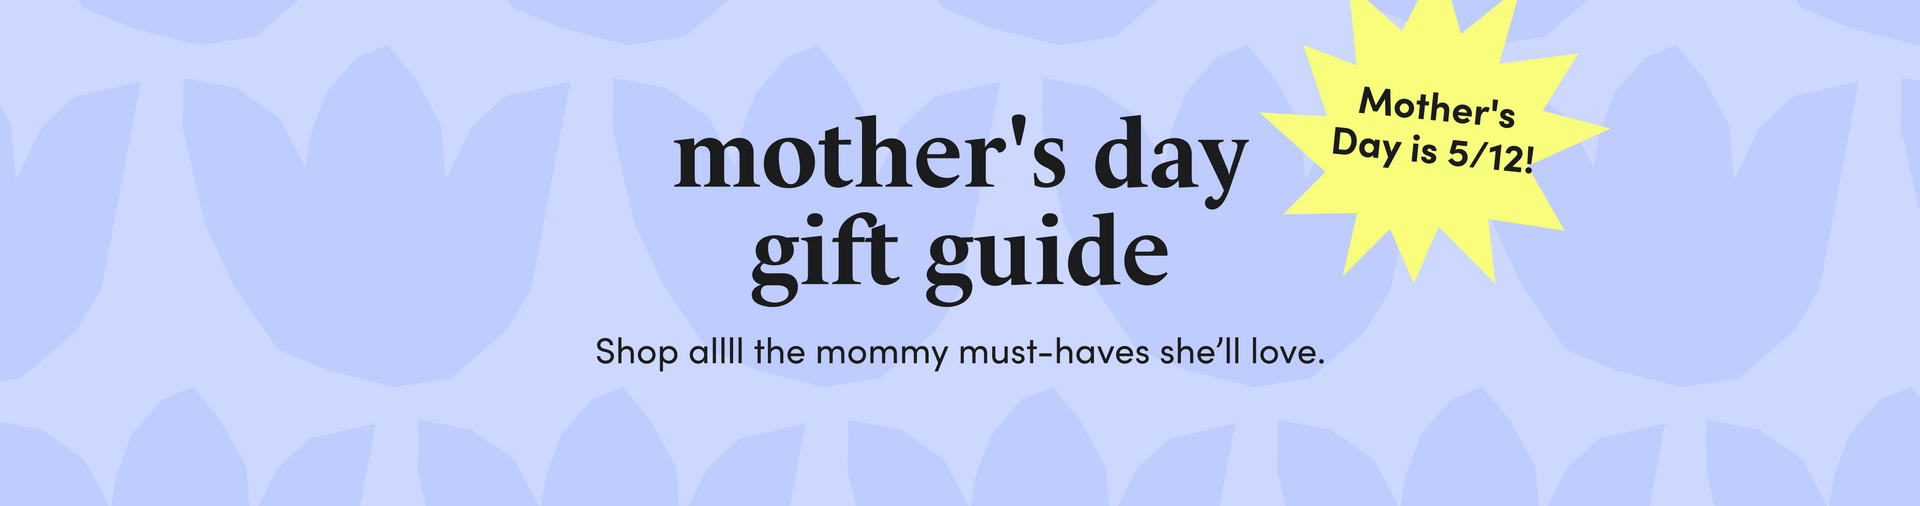 mother's day gift guide Shop allll the mommy must-haves she’ll love. Mother's Day is 5/12!